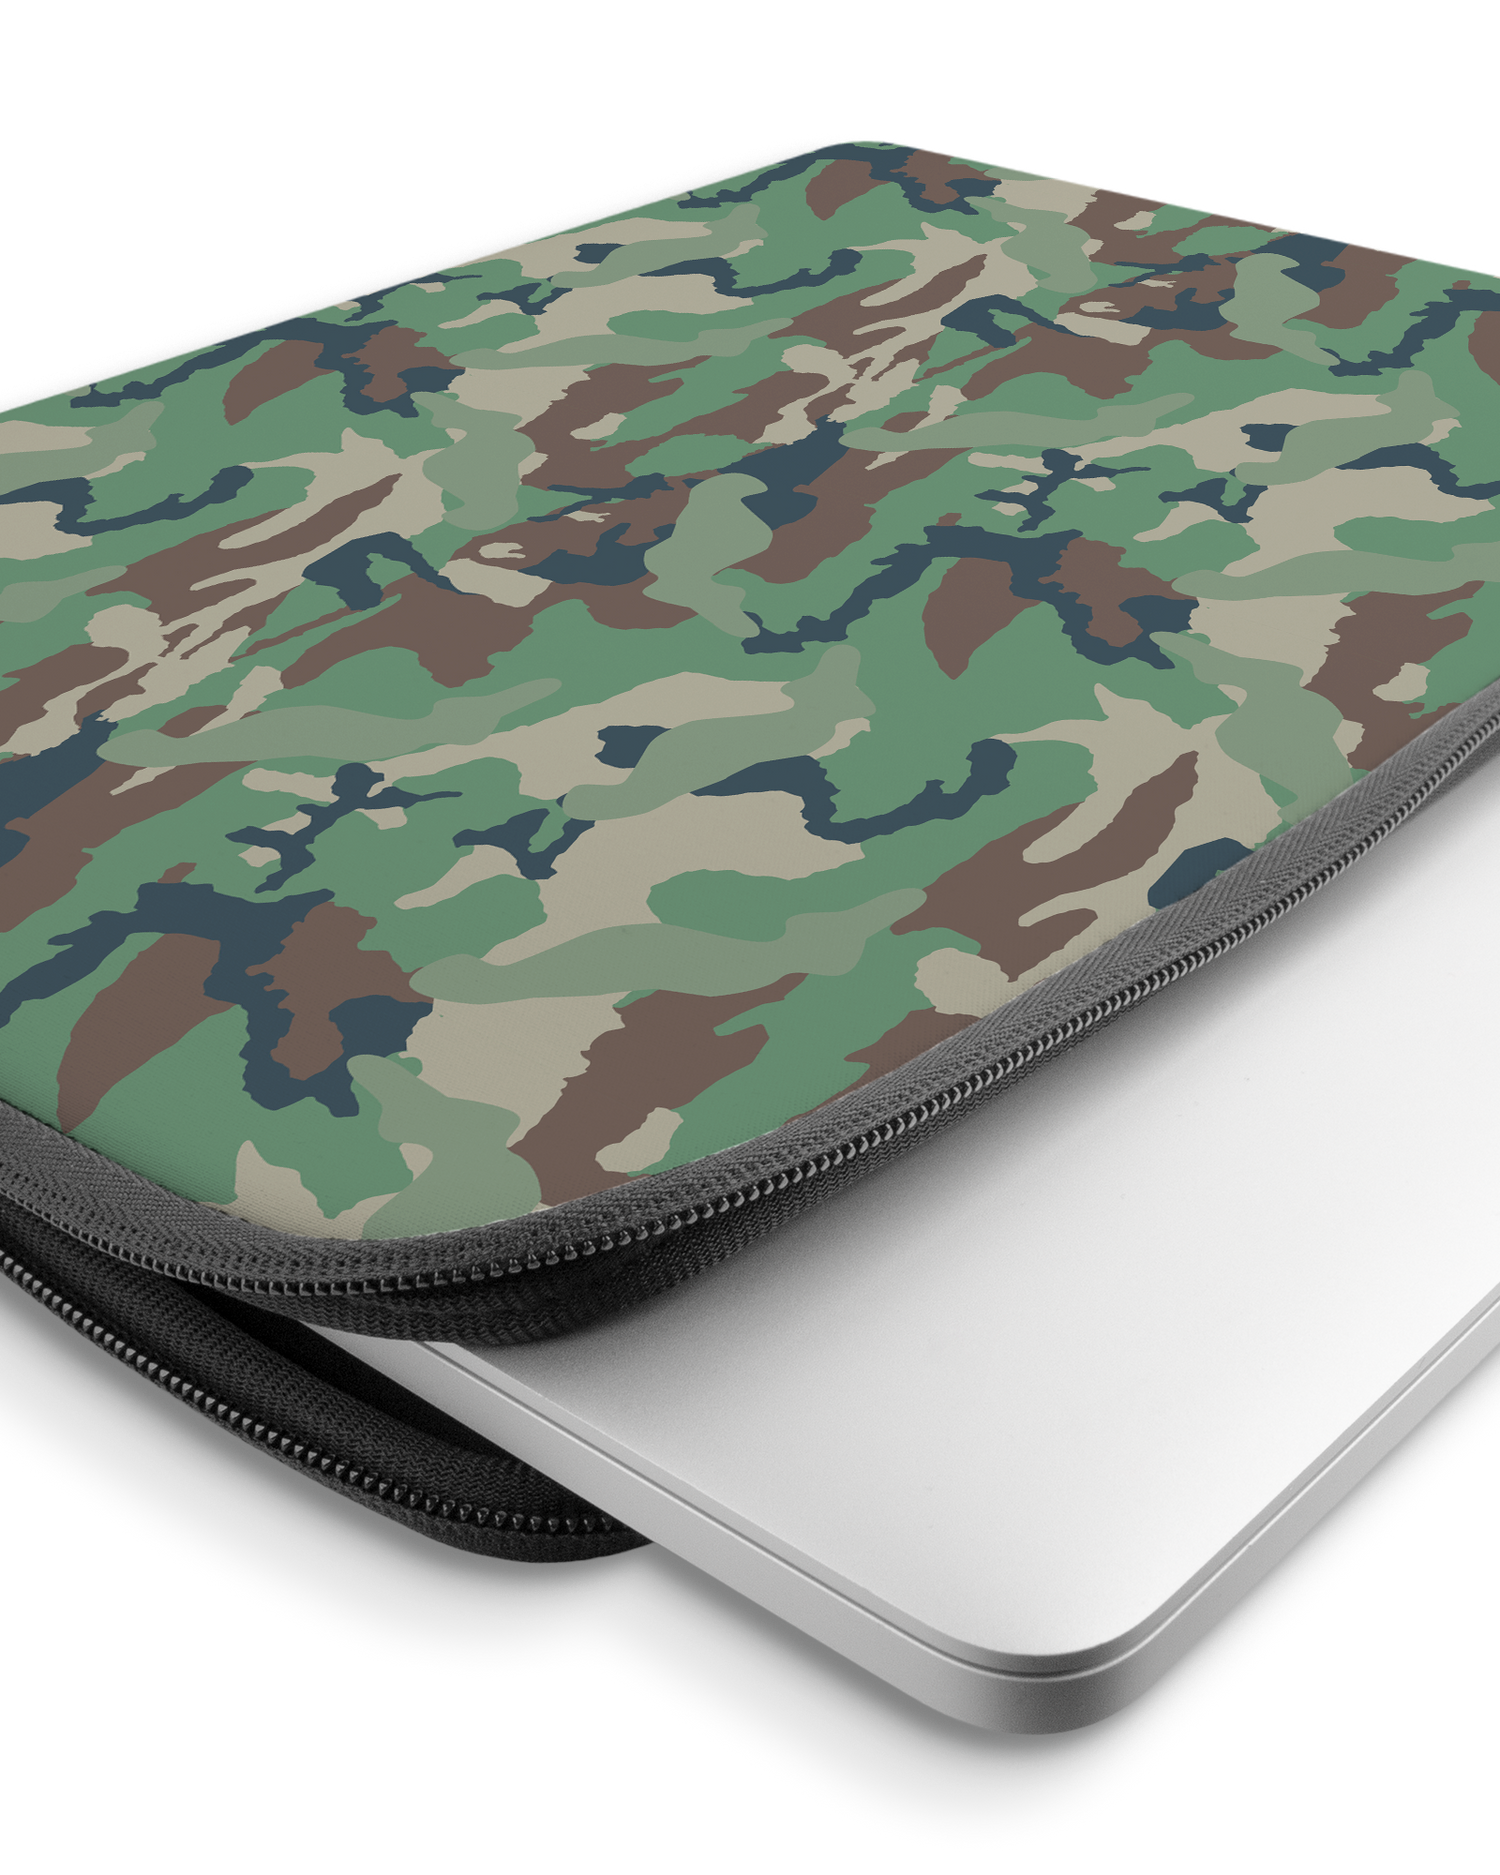 Green and Brown Camo Laptop Case 15-16 inch with device inside